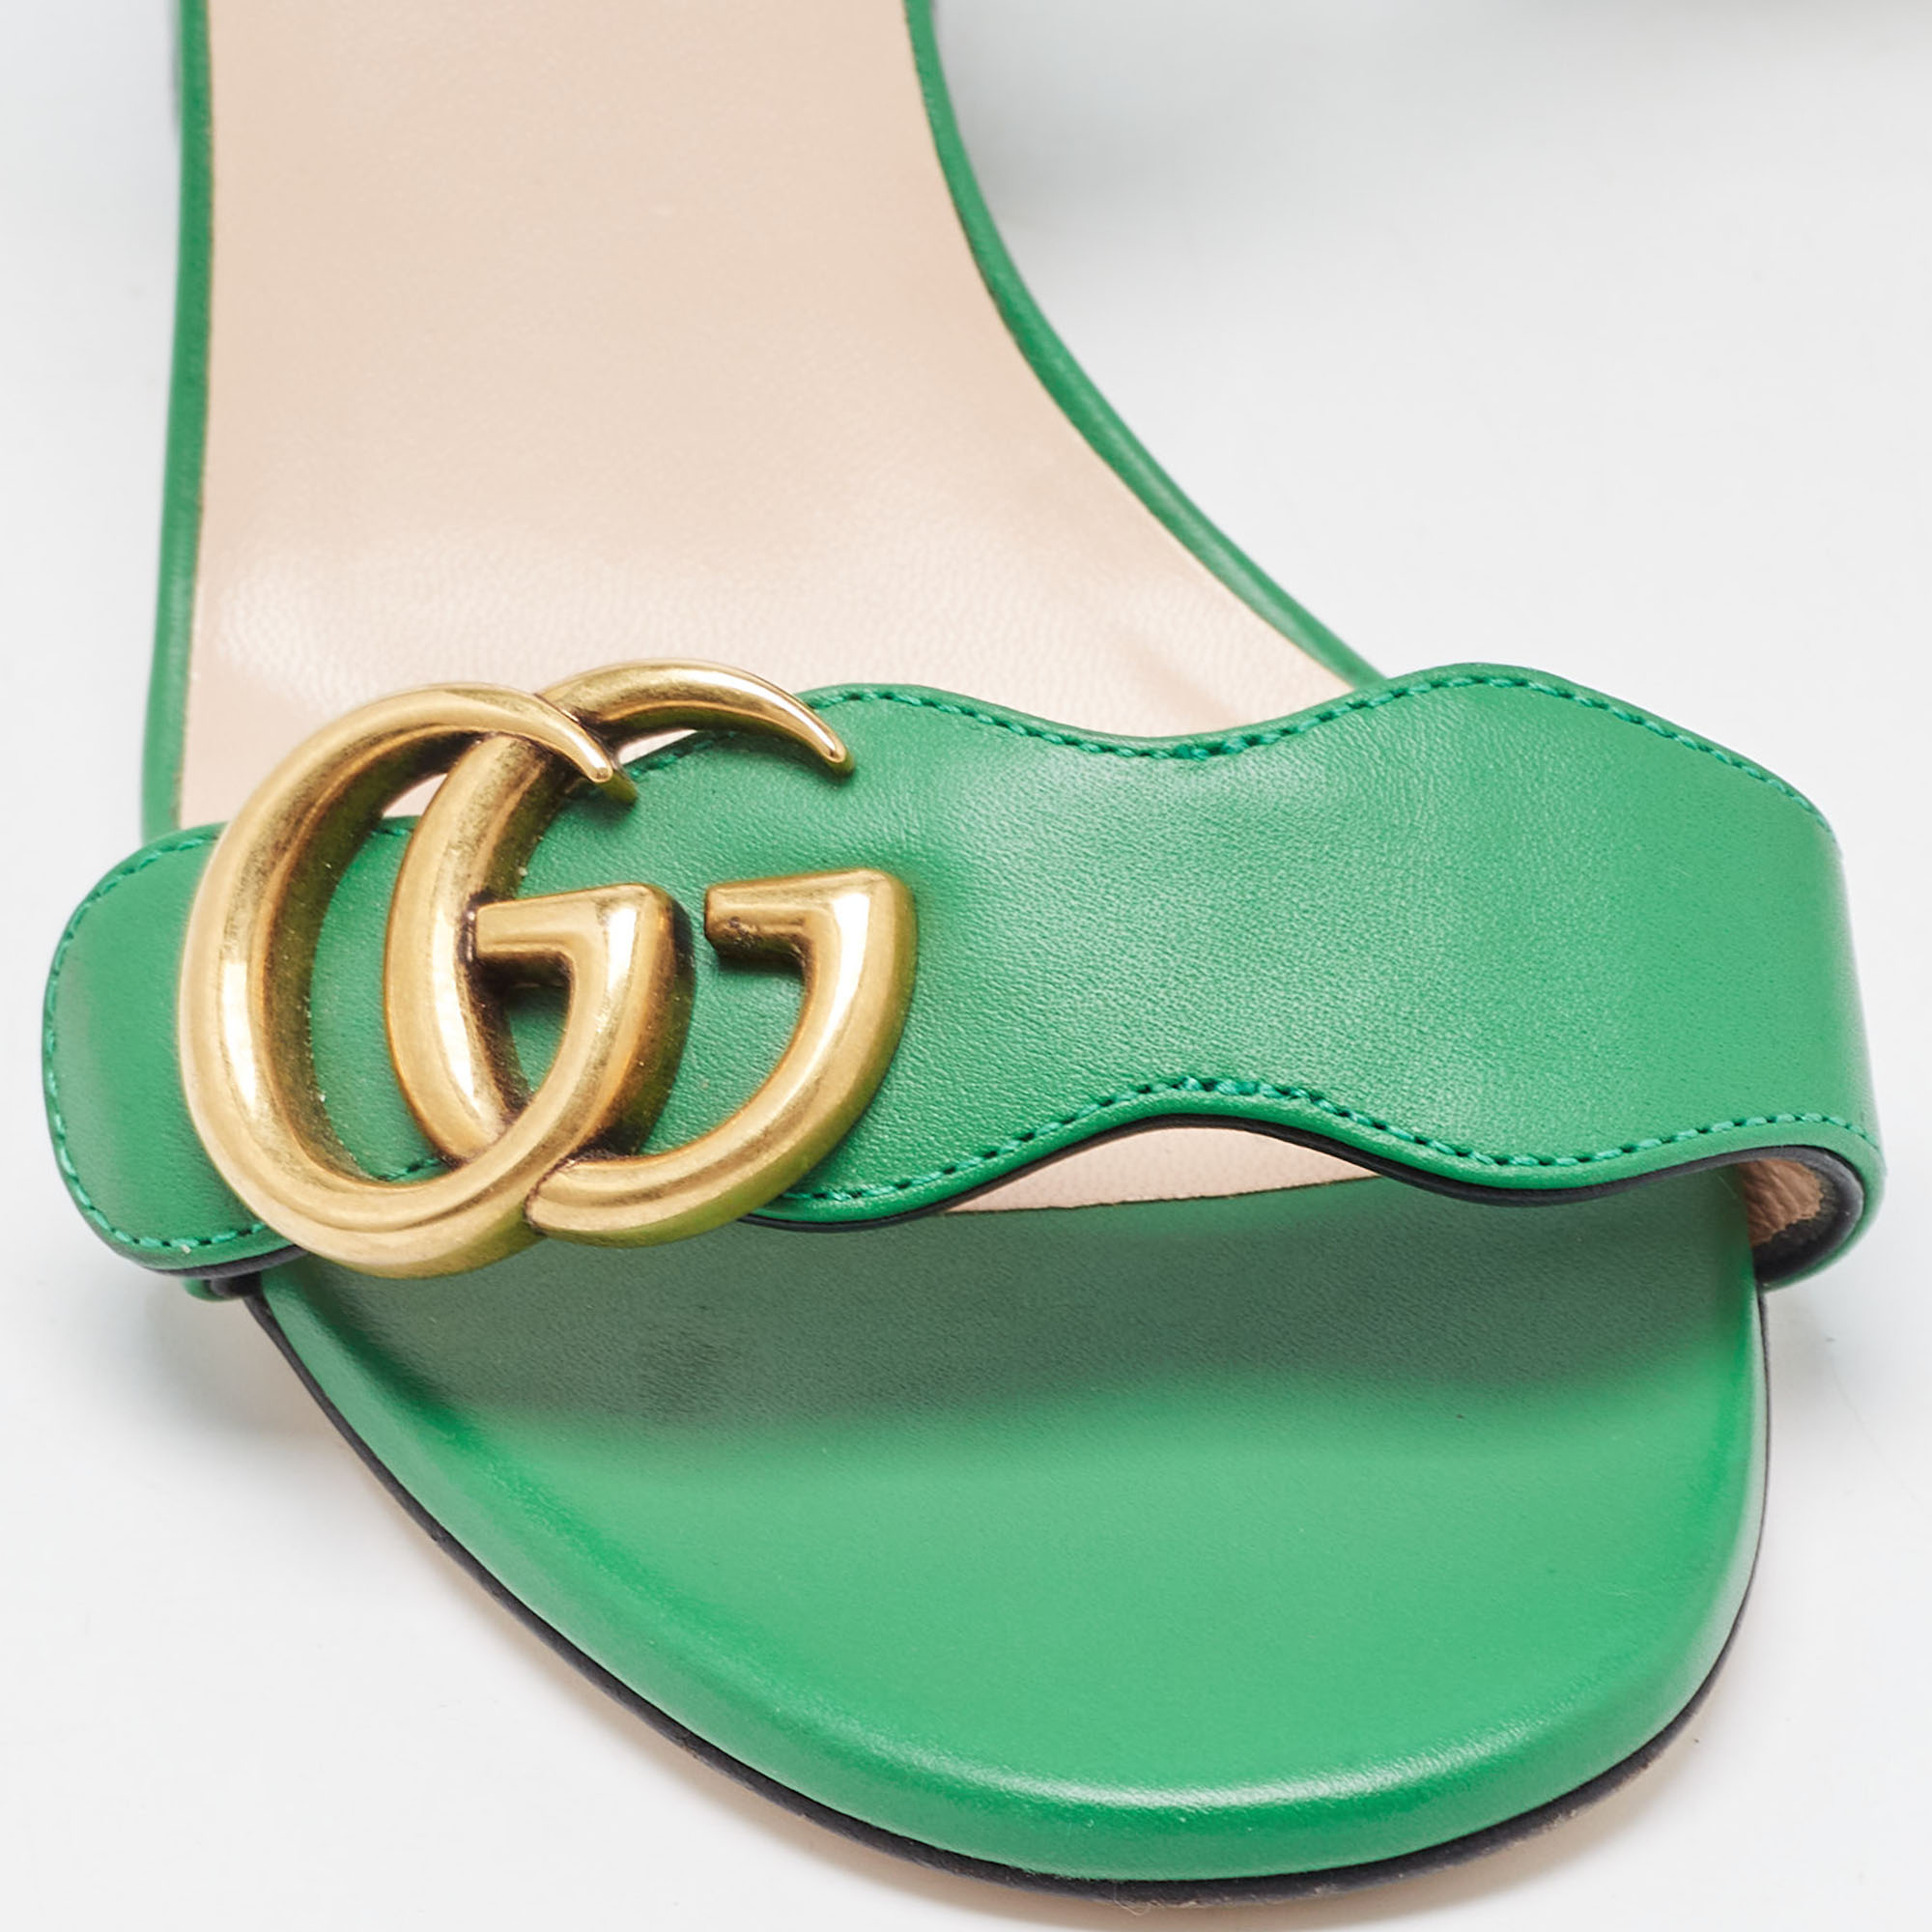 Gucci Green Leather GG Marmont Block Heel Ankle Strap Sandals Size 36